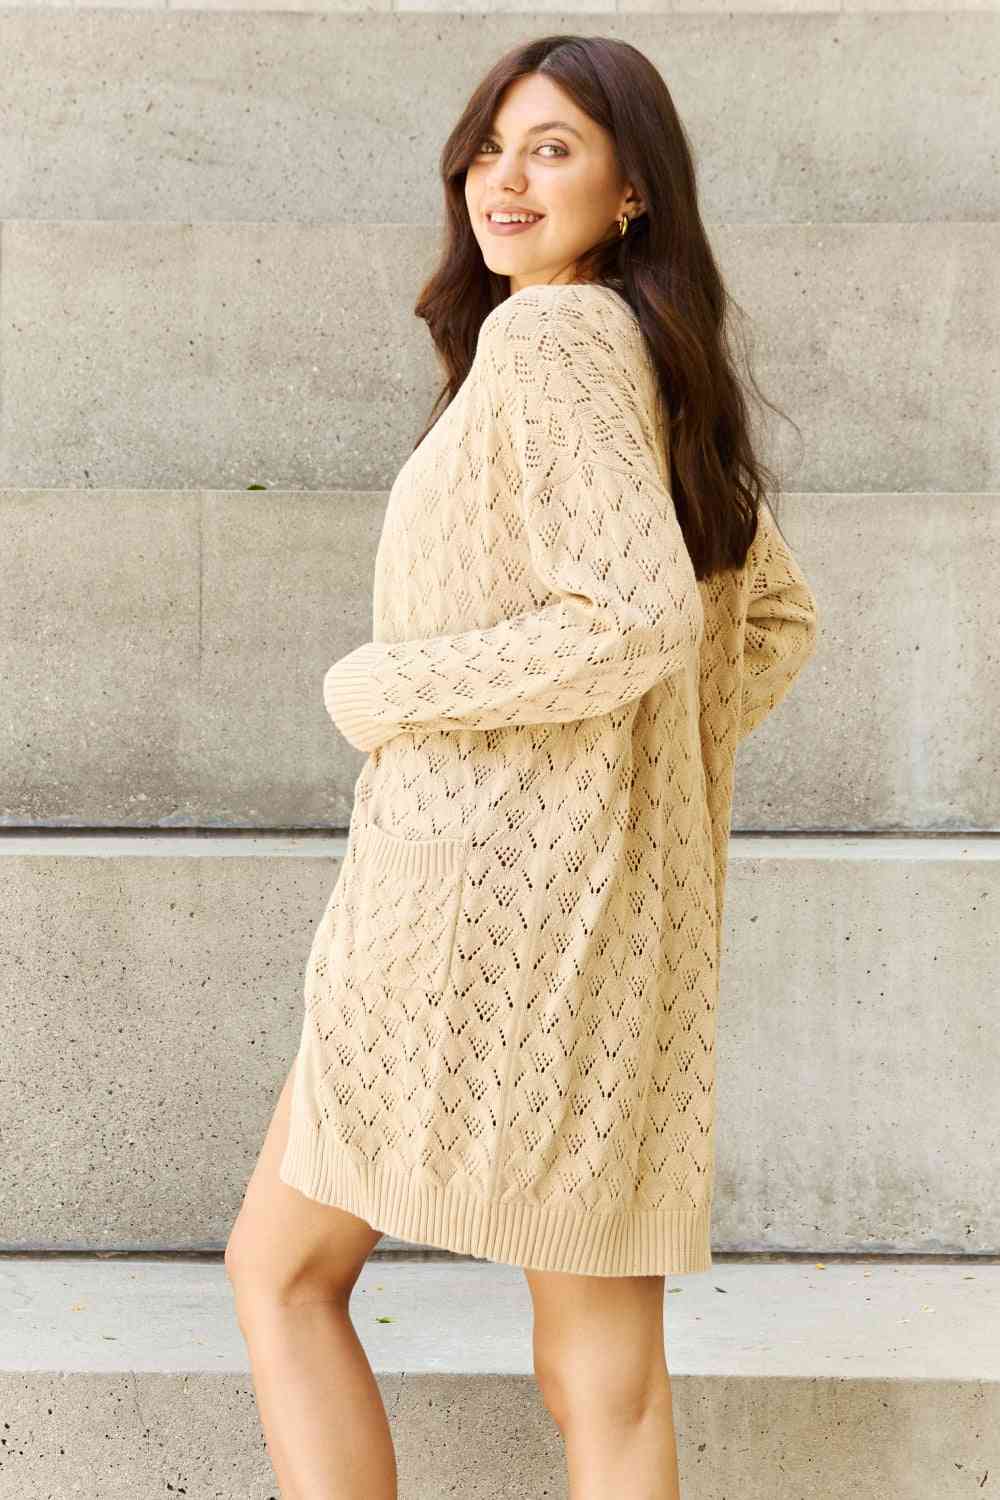 Breezy Days Full Size Open Front Sweater Cardigan - Sweaters - Shirts & Tops - 9 - 2024